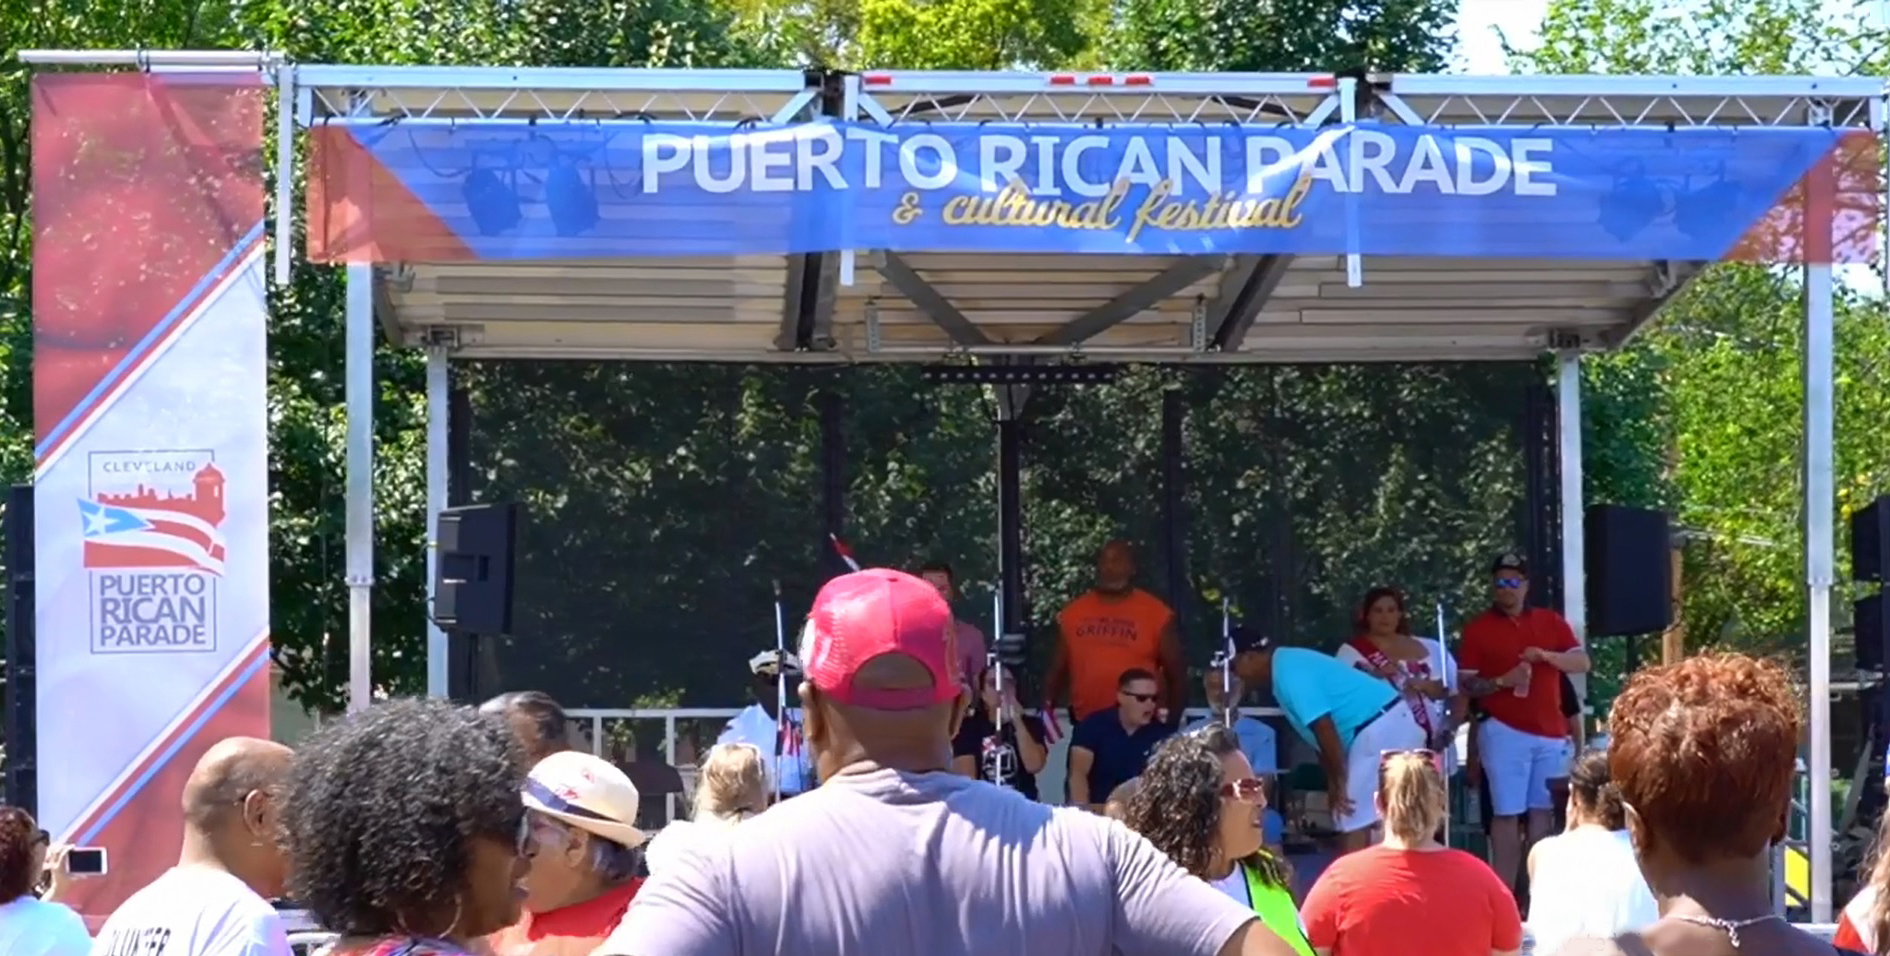 52nd Annual Puerto Rican Parade & Festival ioby